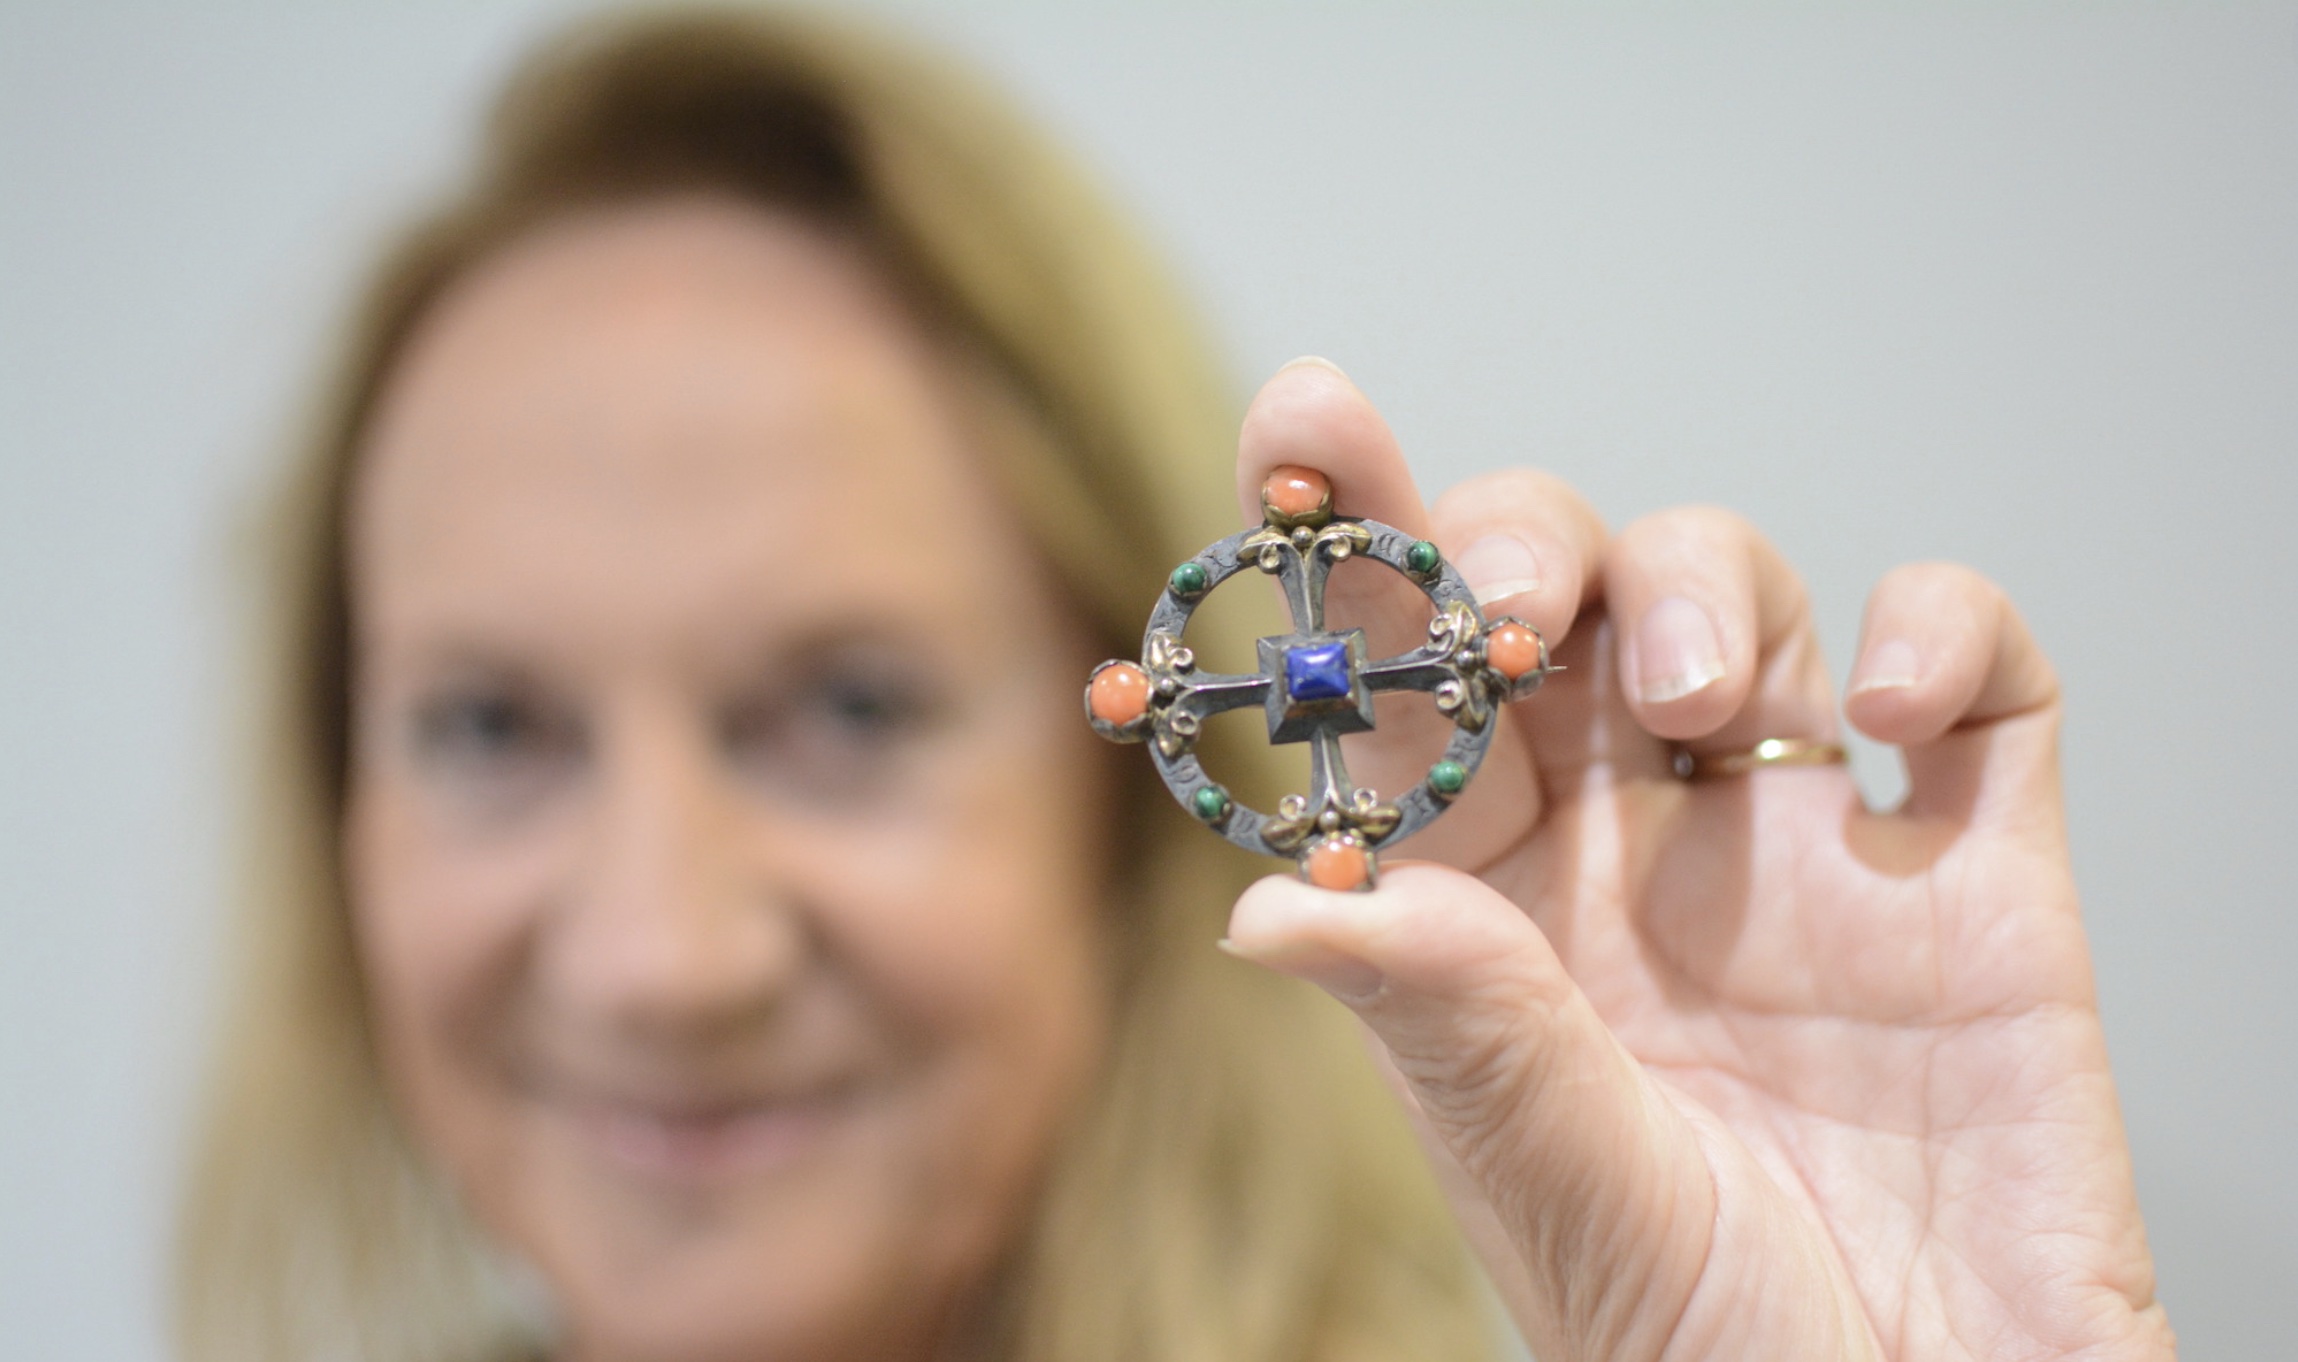 Burges Brooch set to shine in sale – Antique Collecting